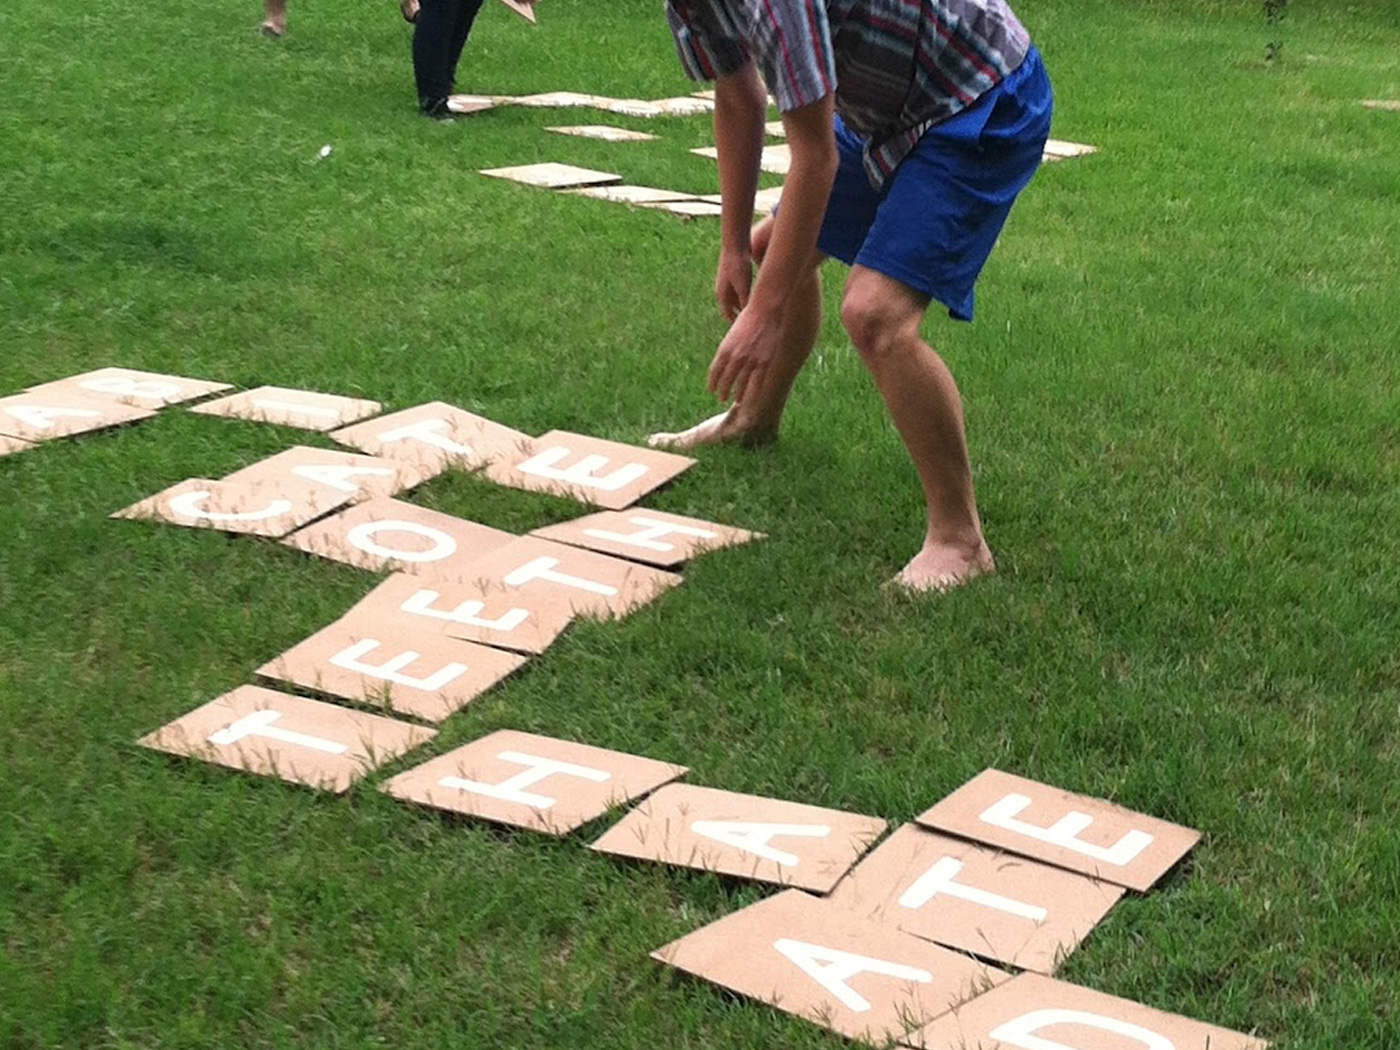 20 Best Picnic Games - Picnic Games for Adults and Kids